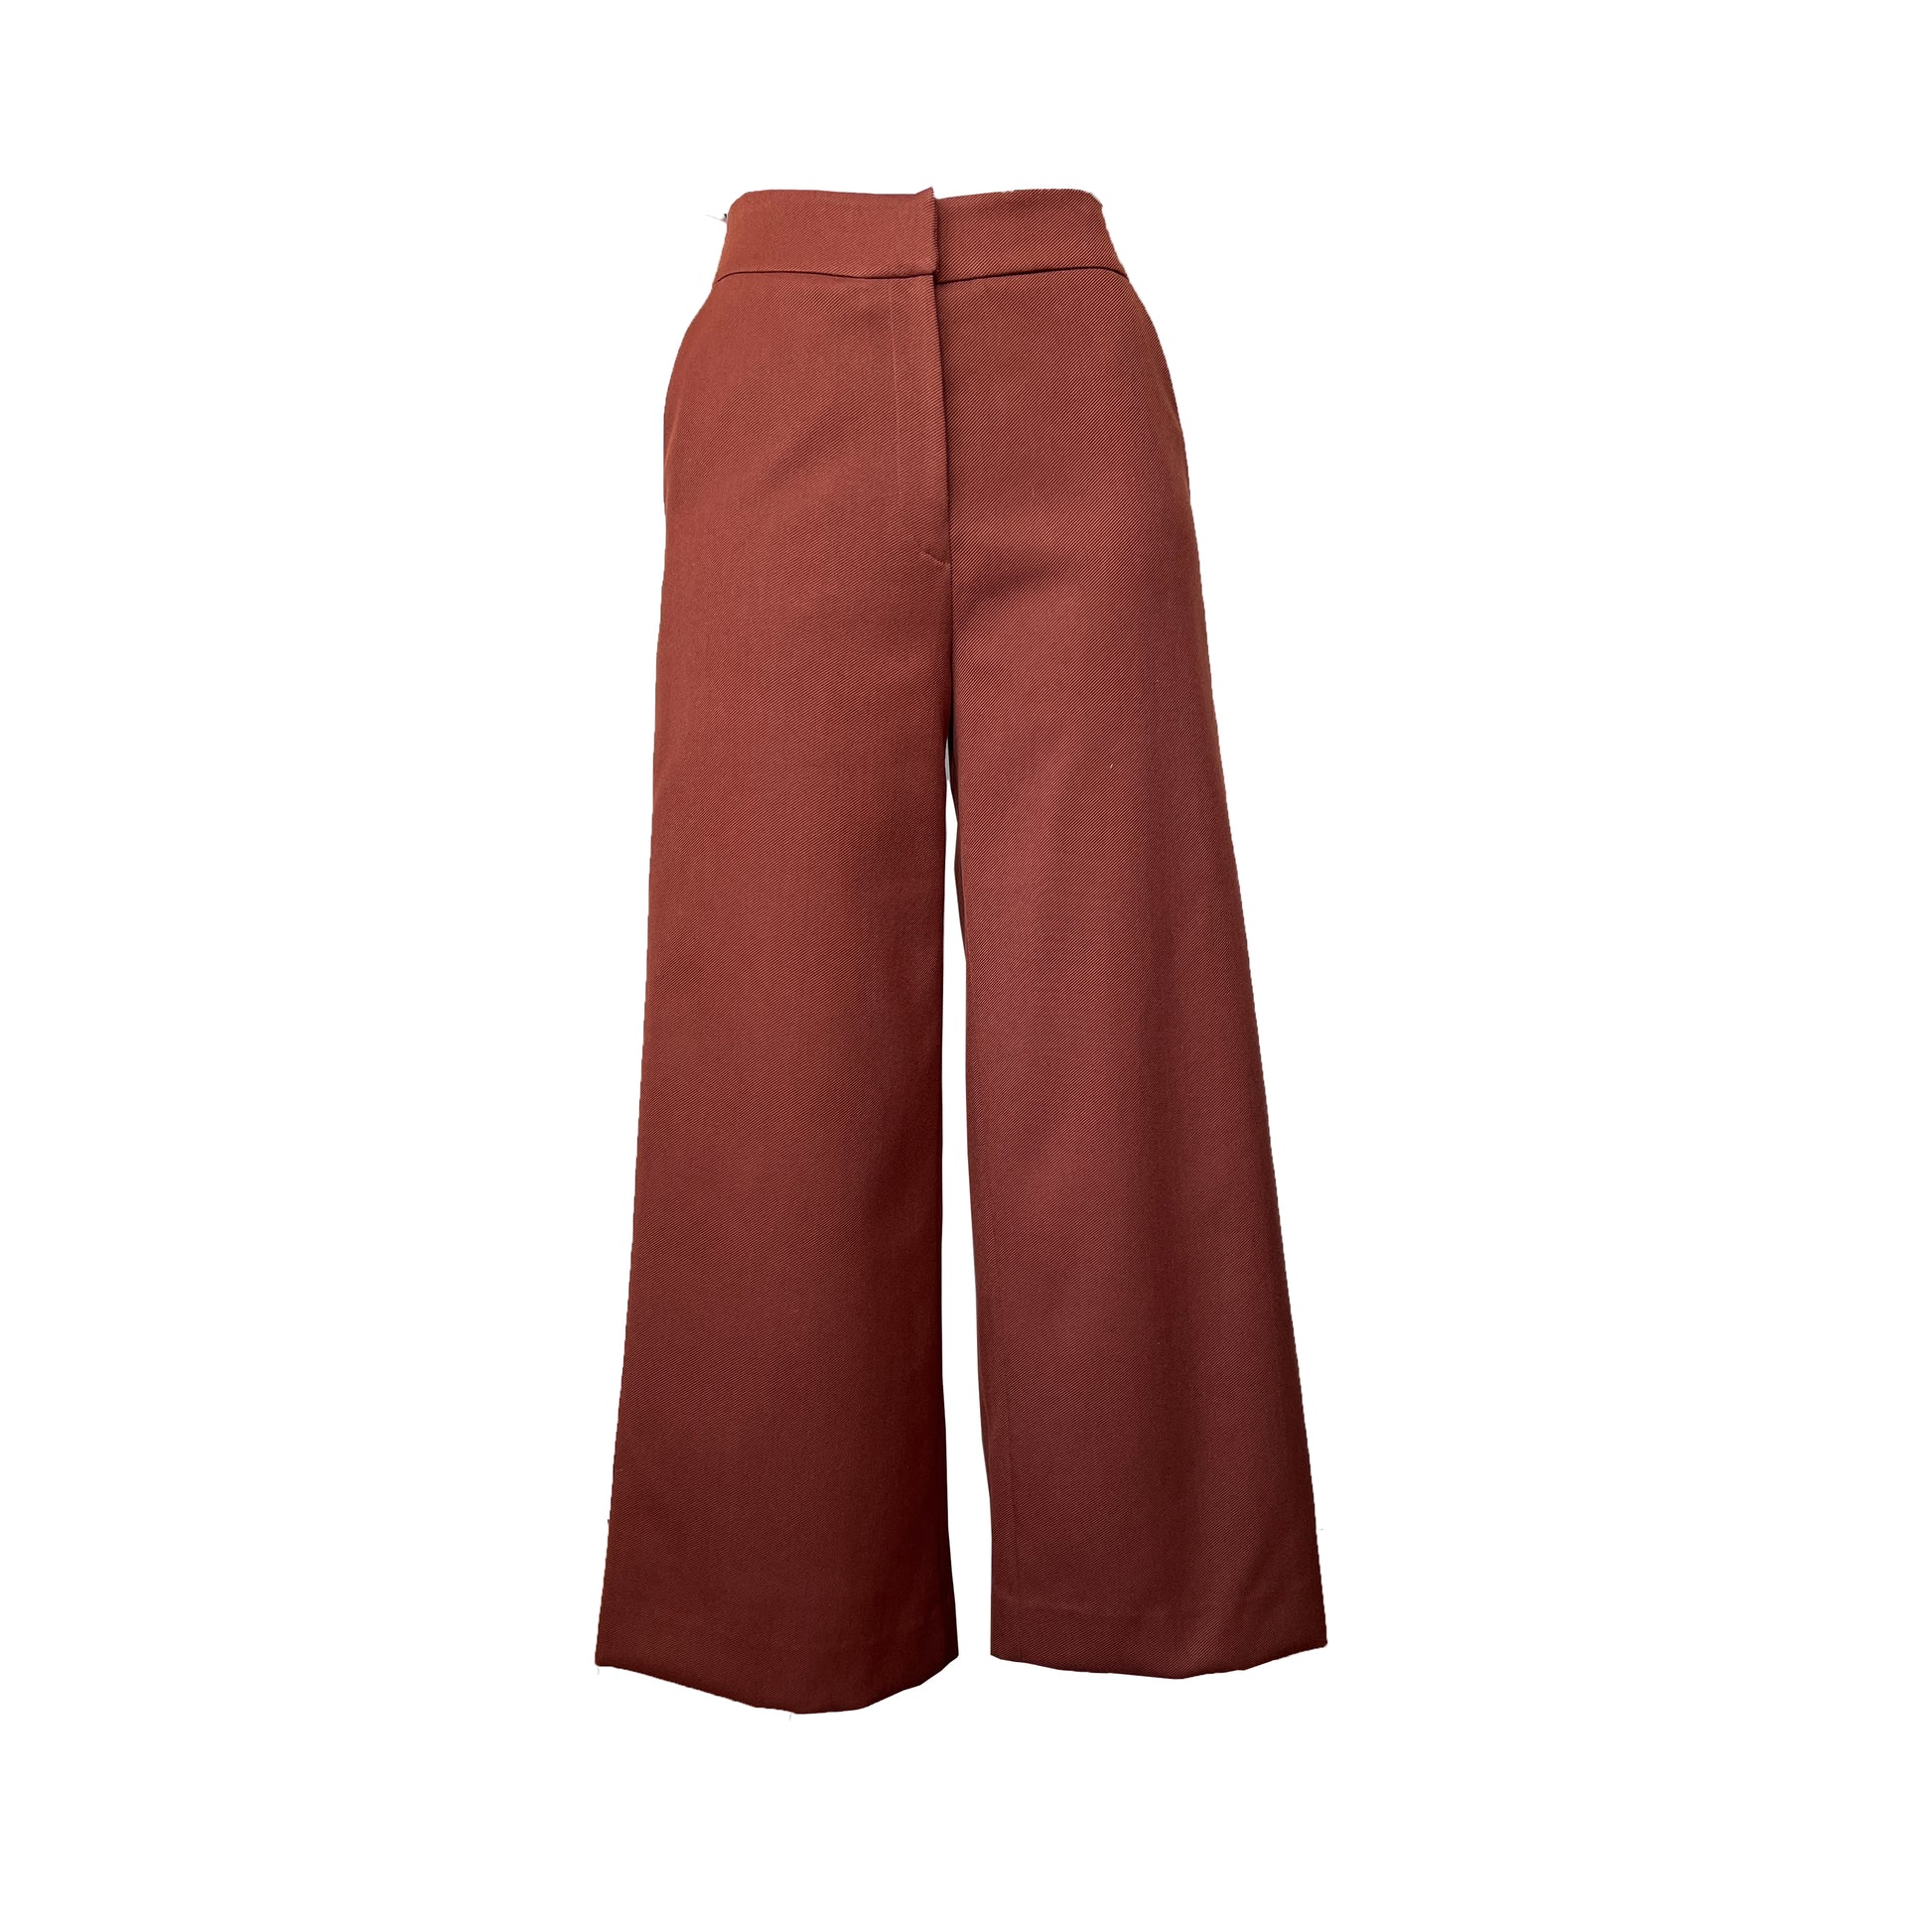 Wool blend high waisted flared pants, made in solid fabric in rust red